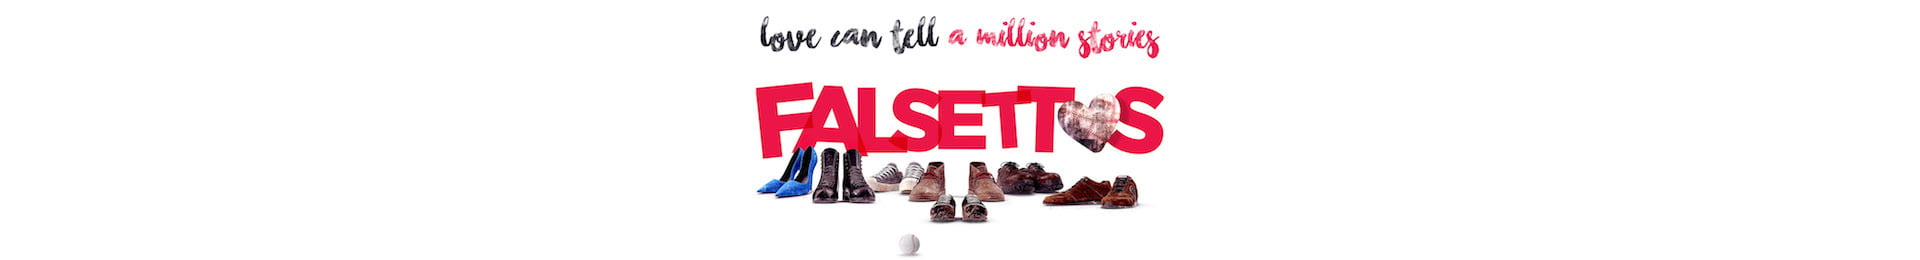 Falsettos: The Make A Difference Trust Charity Gala banner image